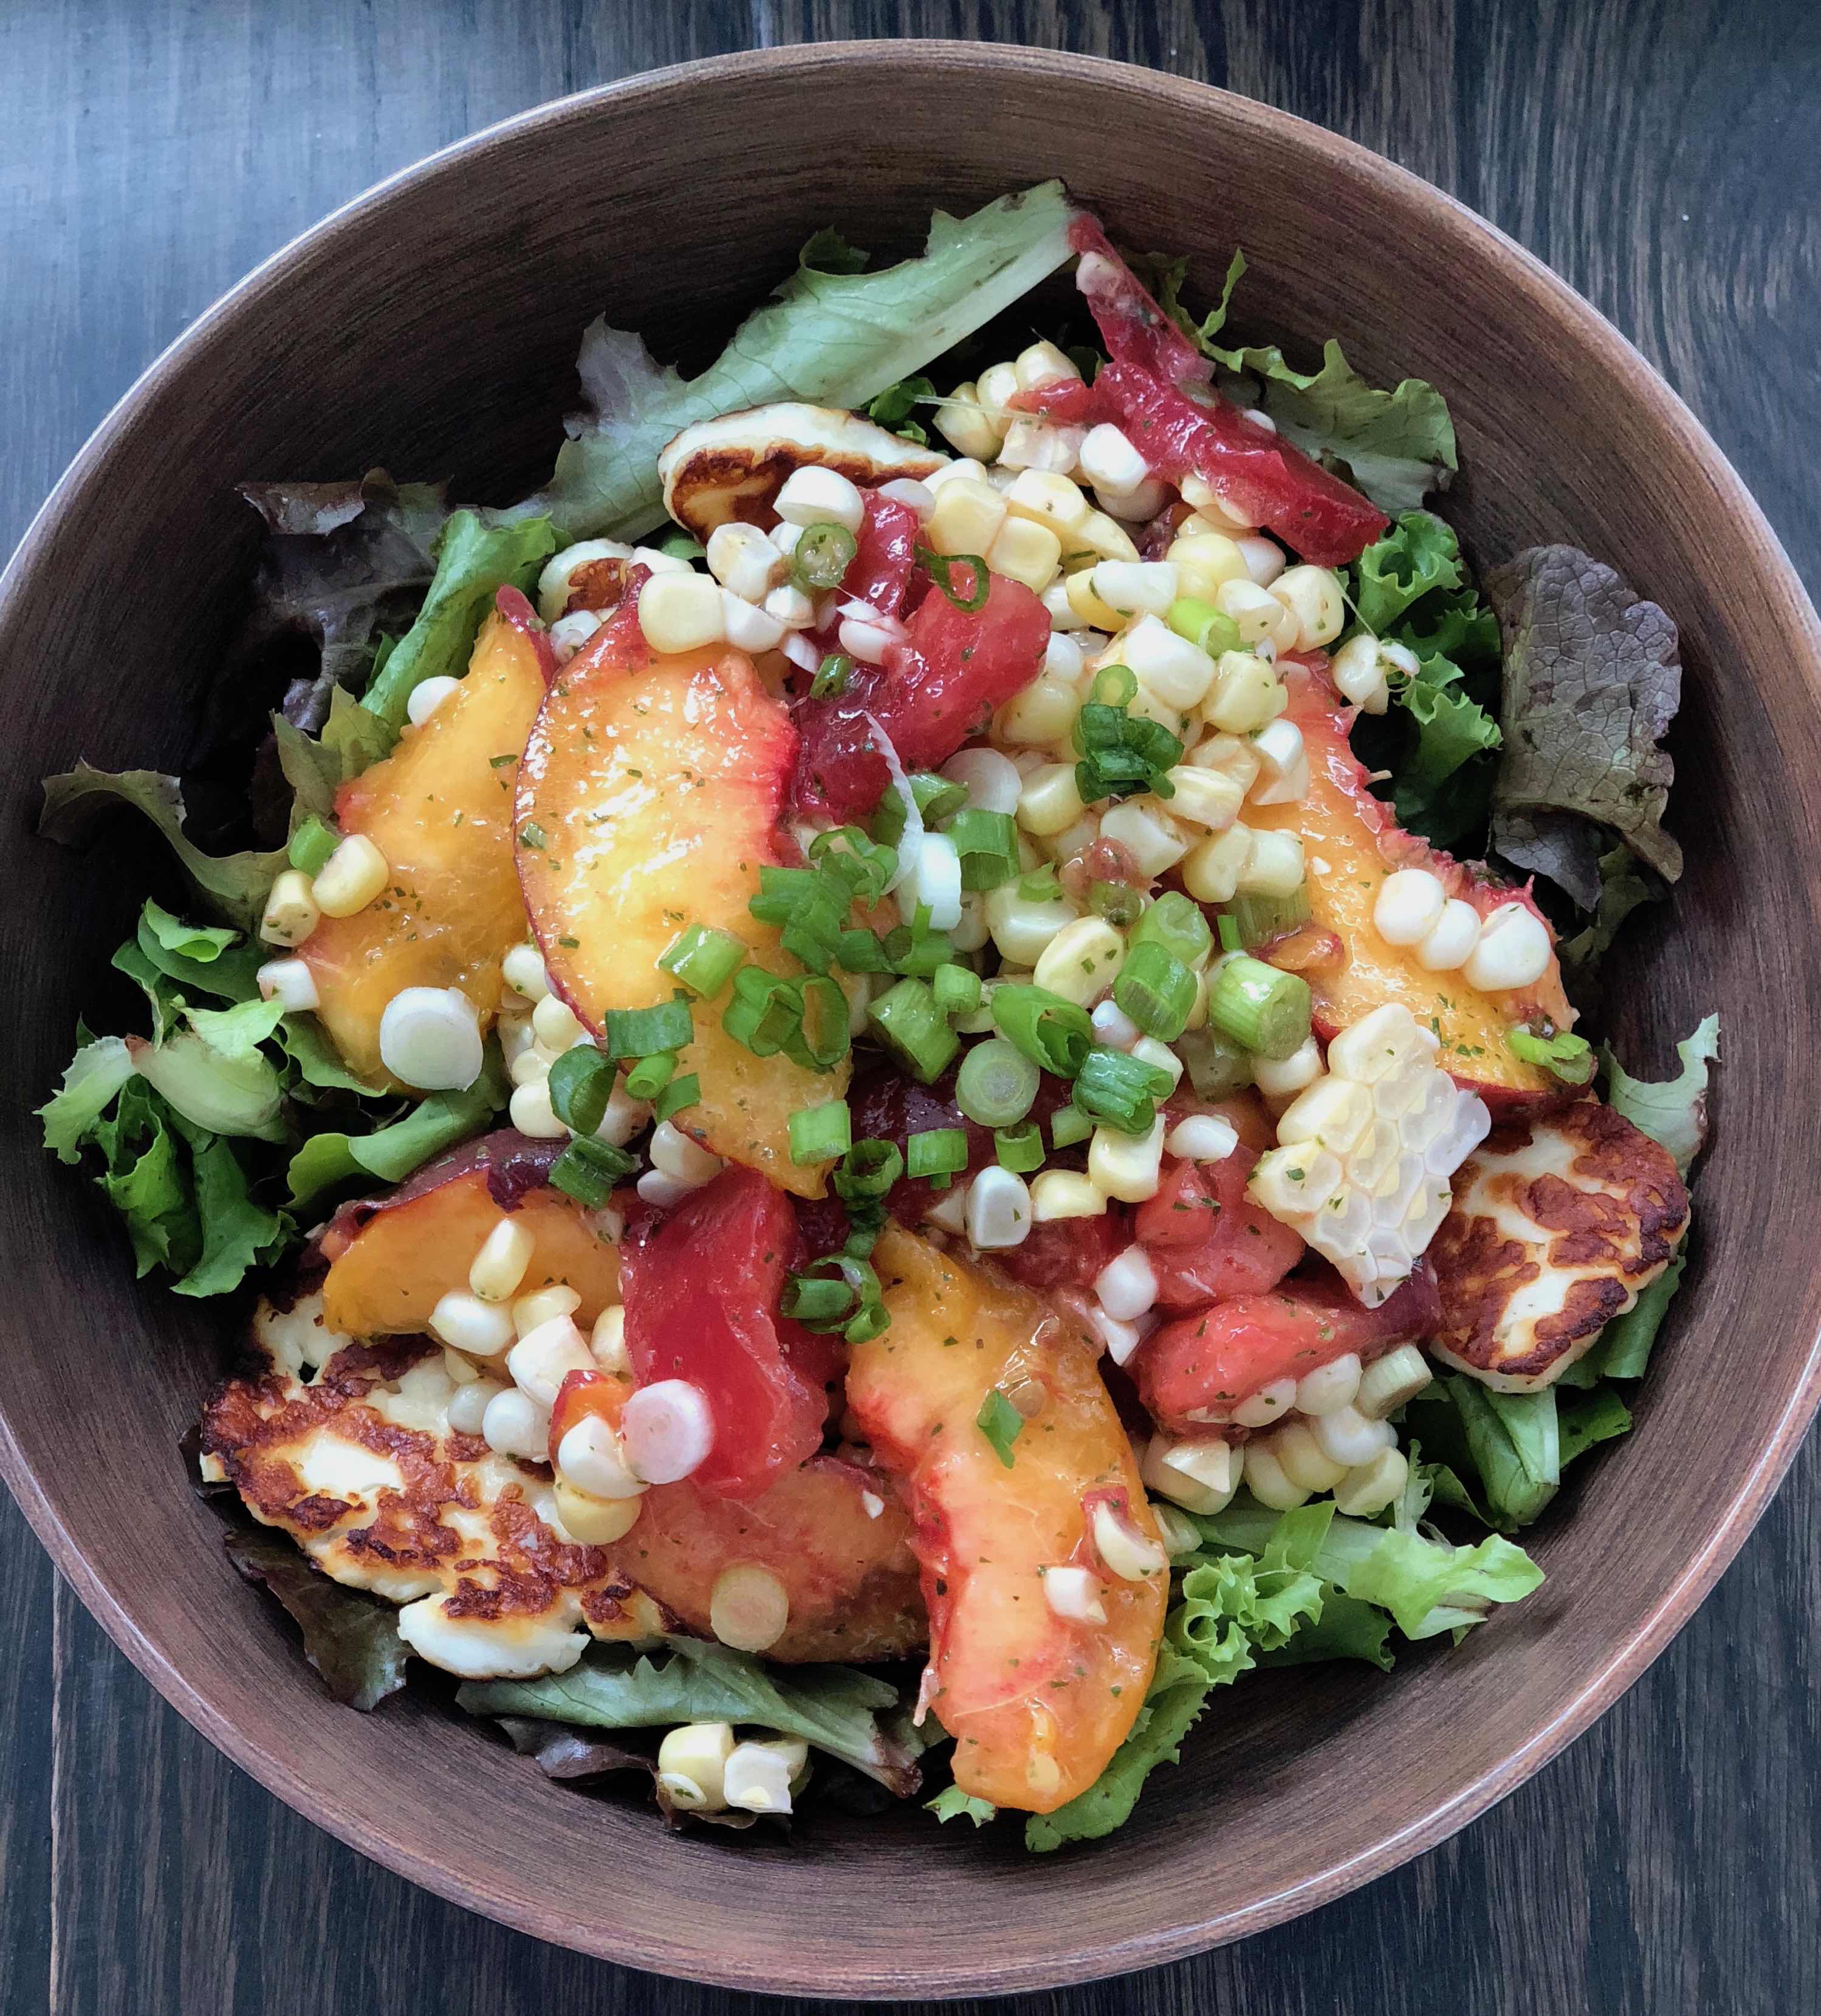 Destined to become your favorite healthy summer salad, this recipe features fresh sweet corn, juicy sweet peaches and tomatoes with a lemon basil vinaigrette. It's Paleo, Whole30, Sugar-Free, Gluten-Free and Vegetarian. | www.grownupdish.com